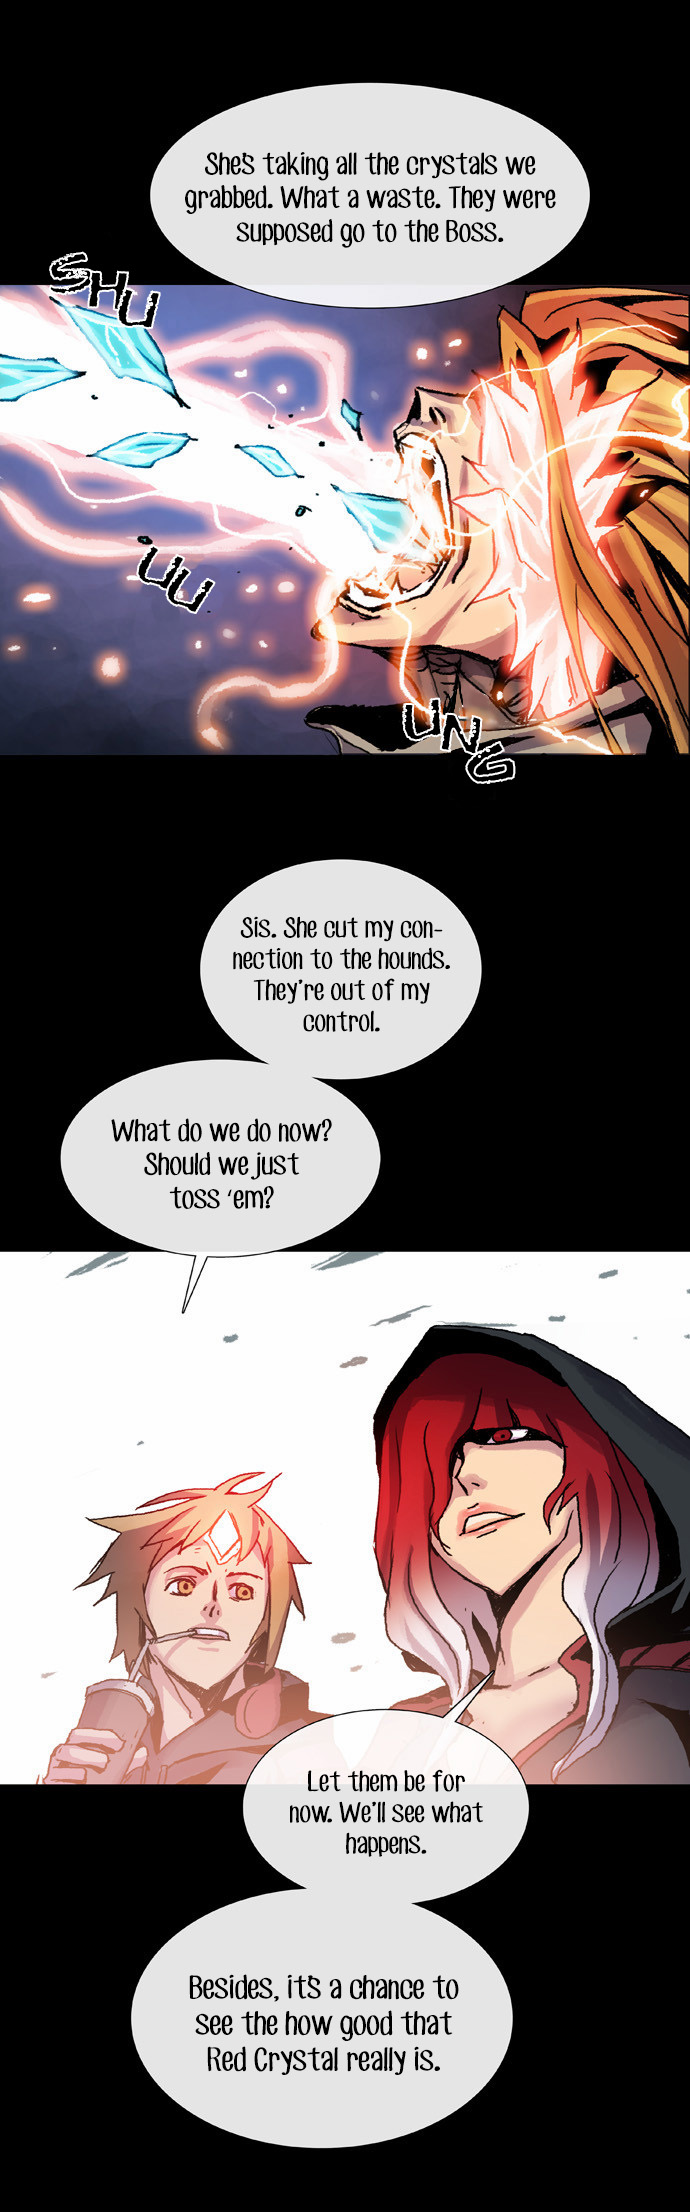 Red Doll Ch.09